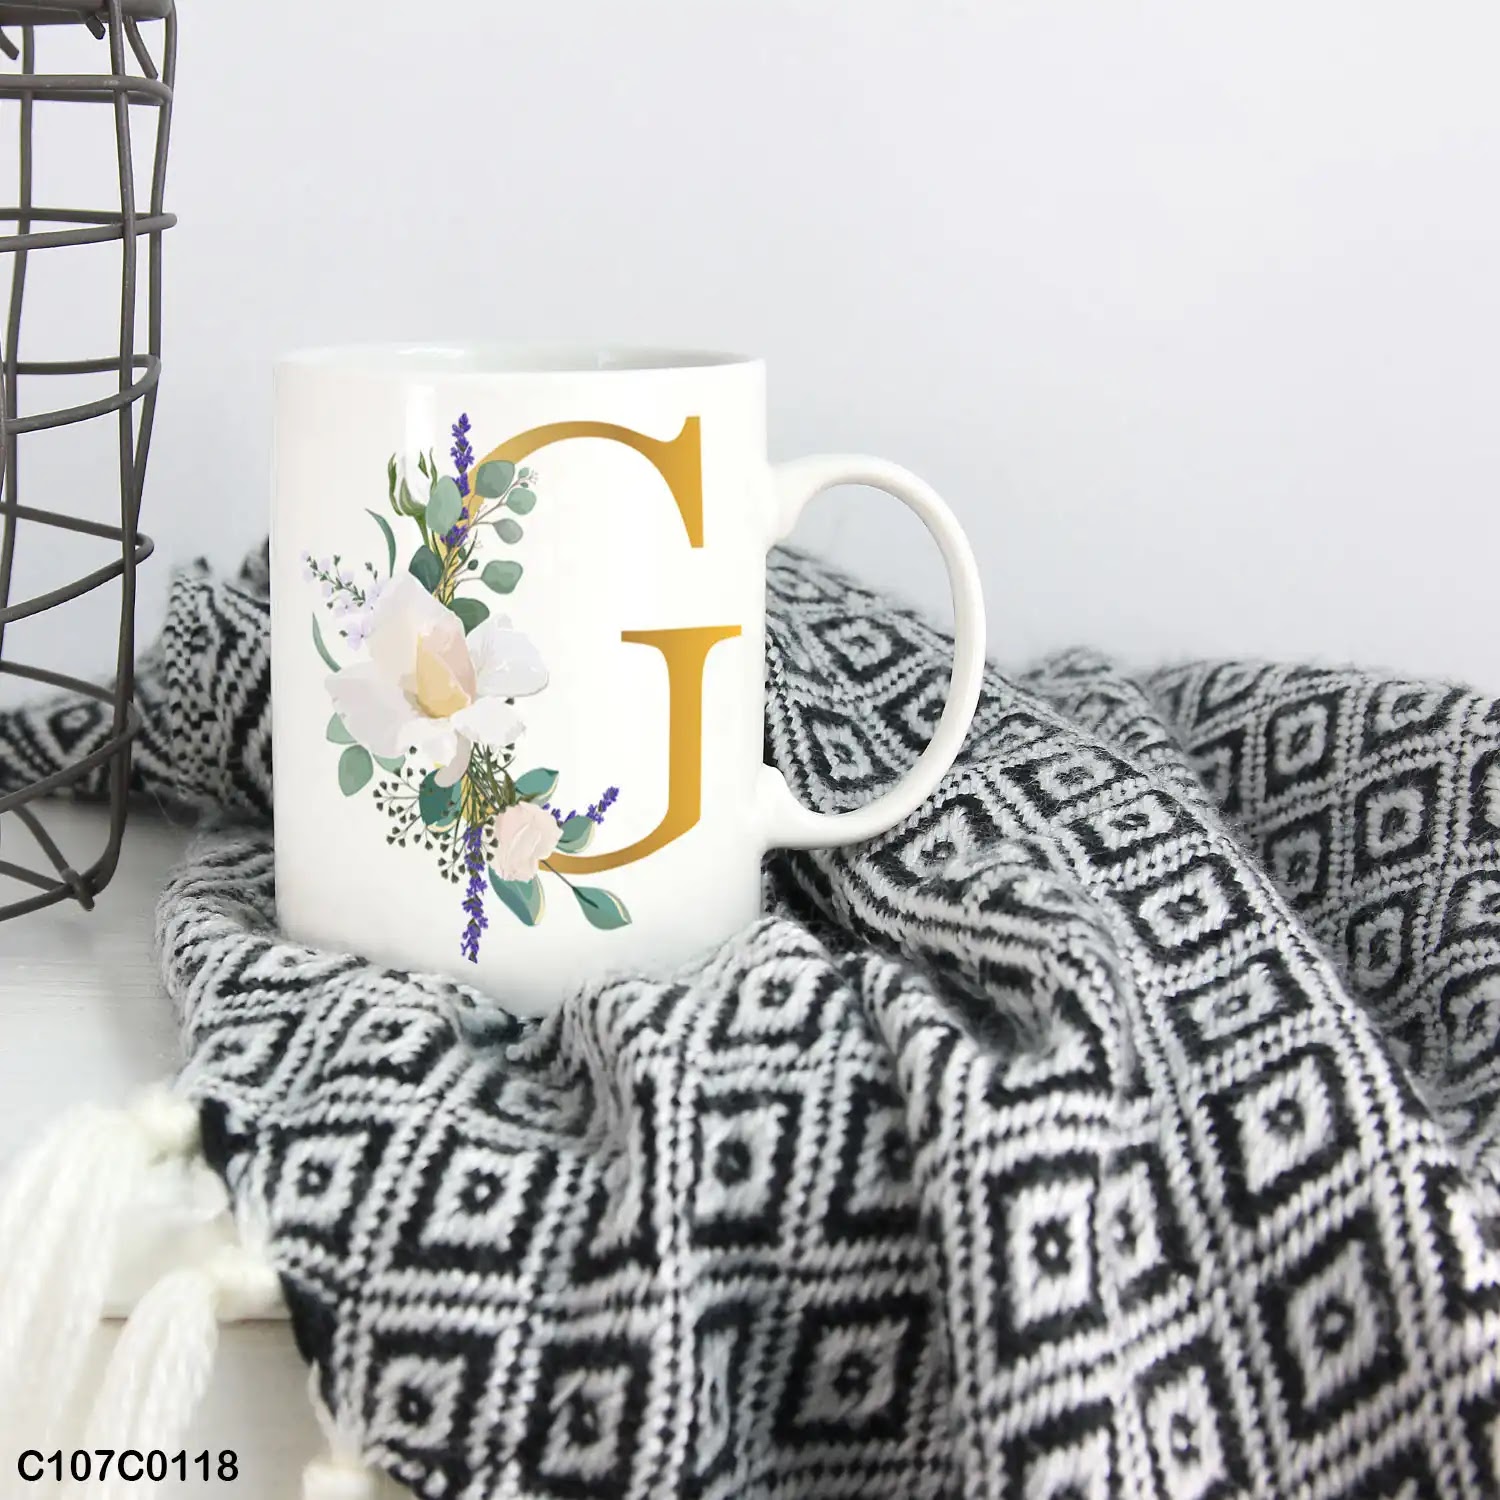 A white mug (cup) printed with gold Letter "G" and small white branch